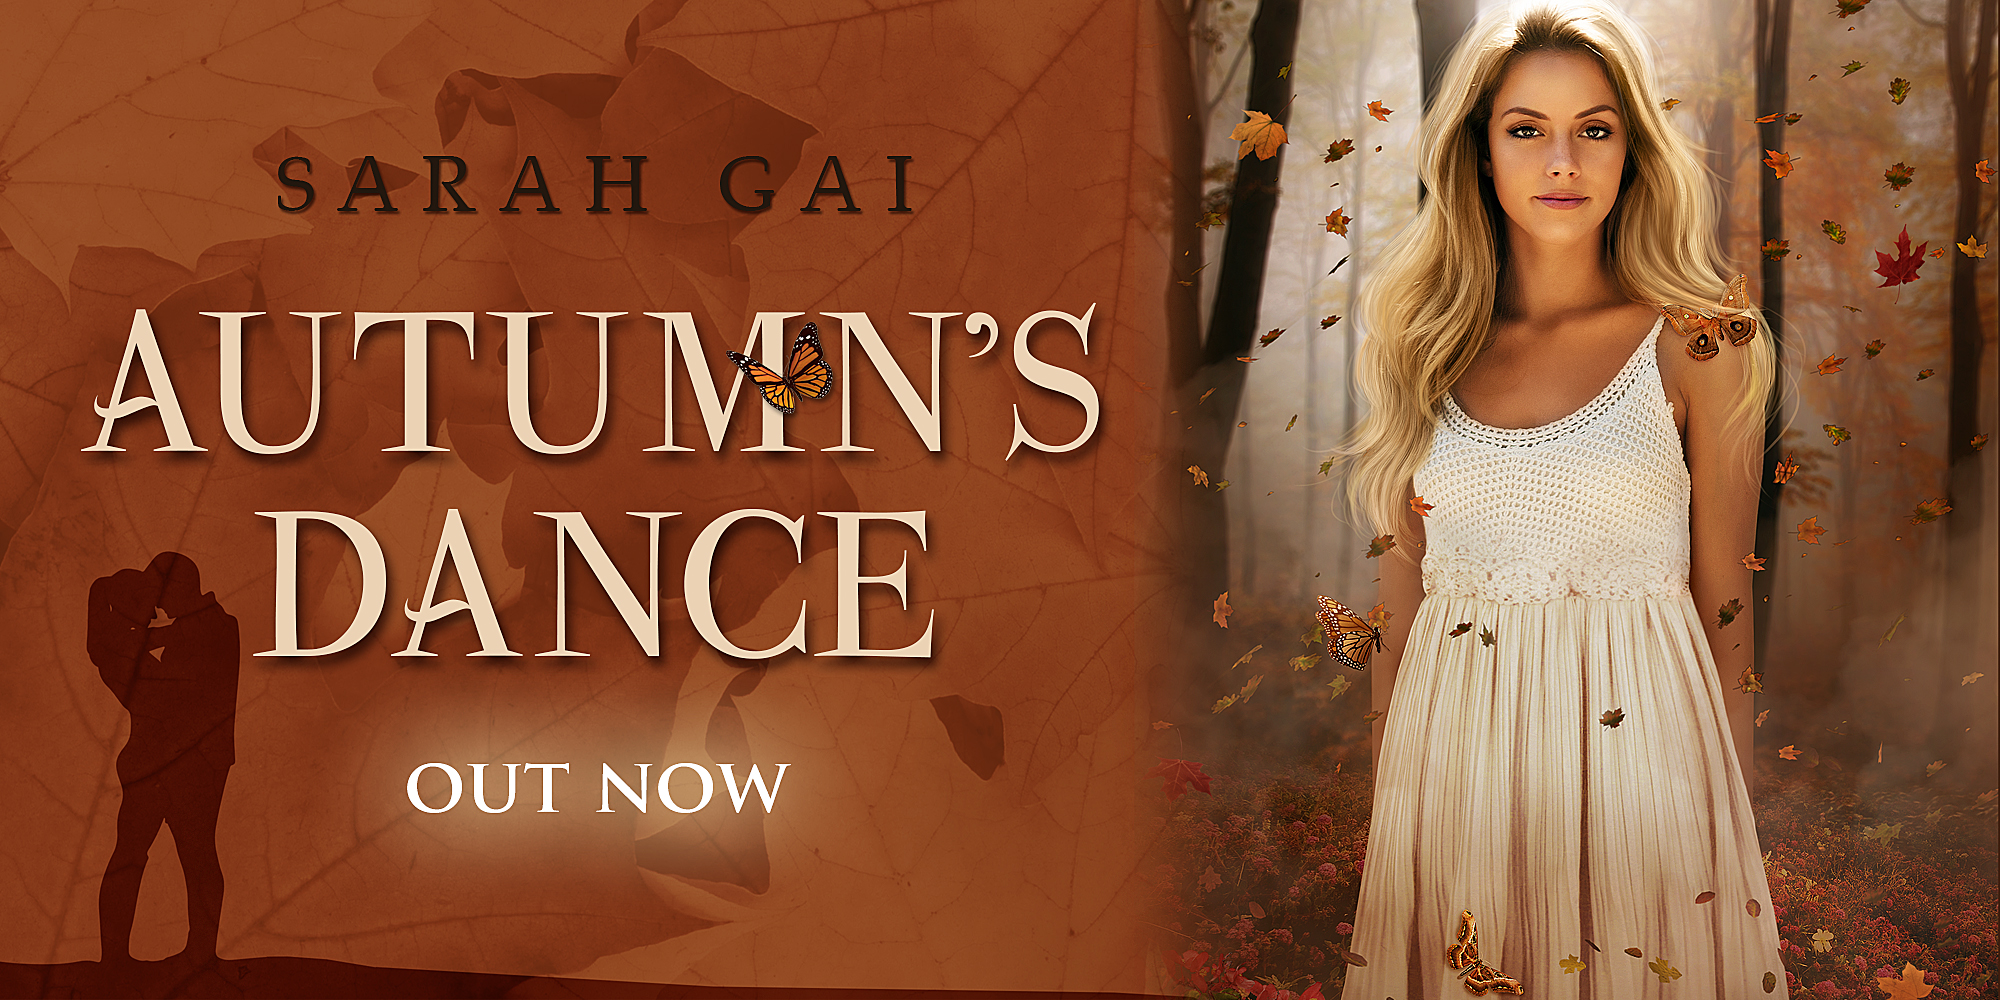 Autumn’s Dance Release Day